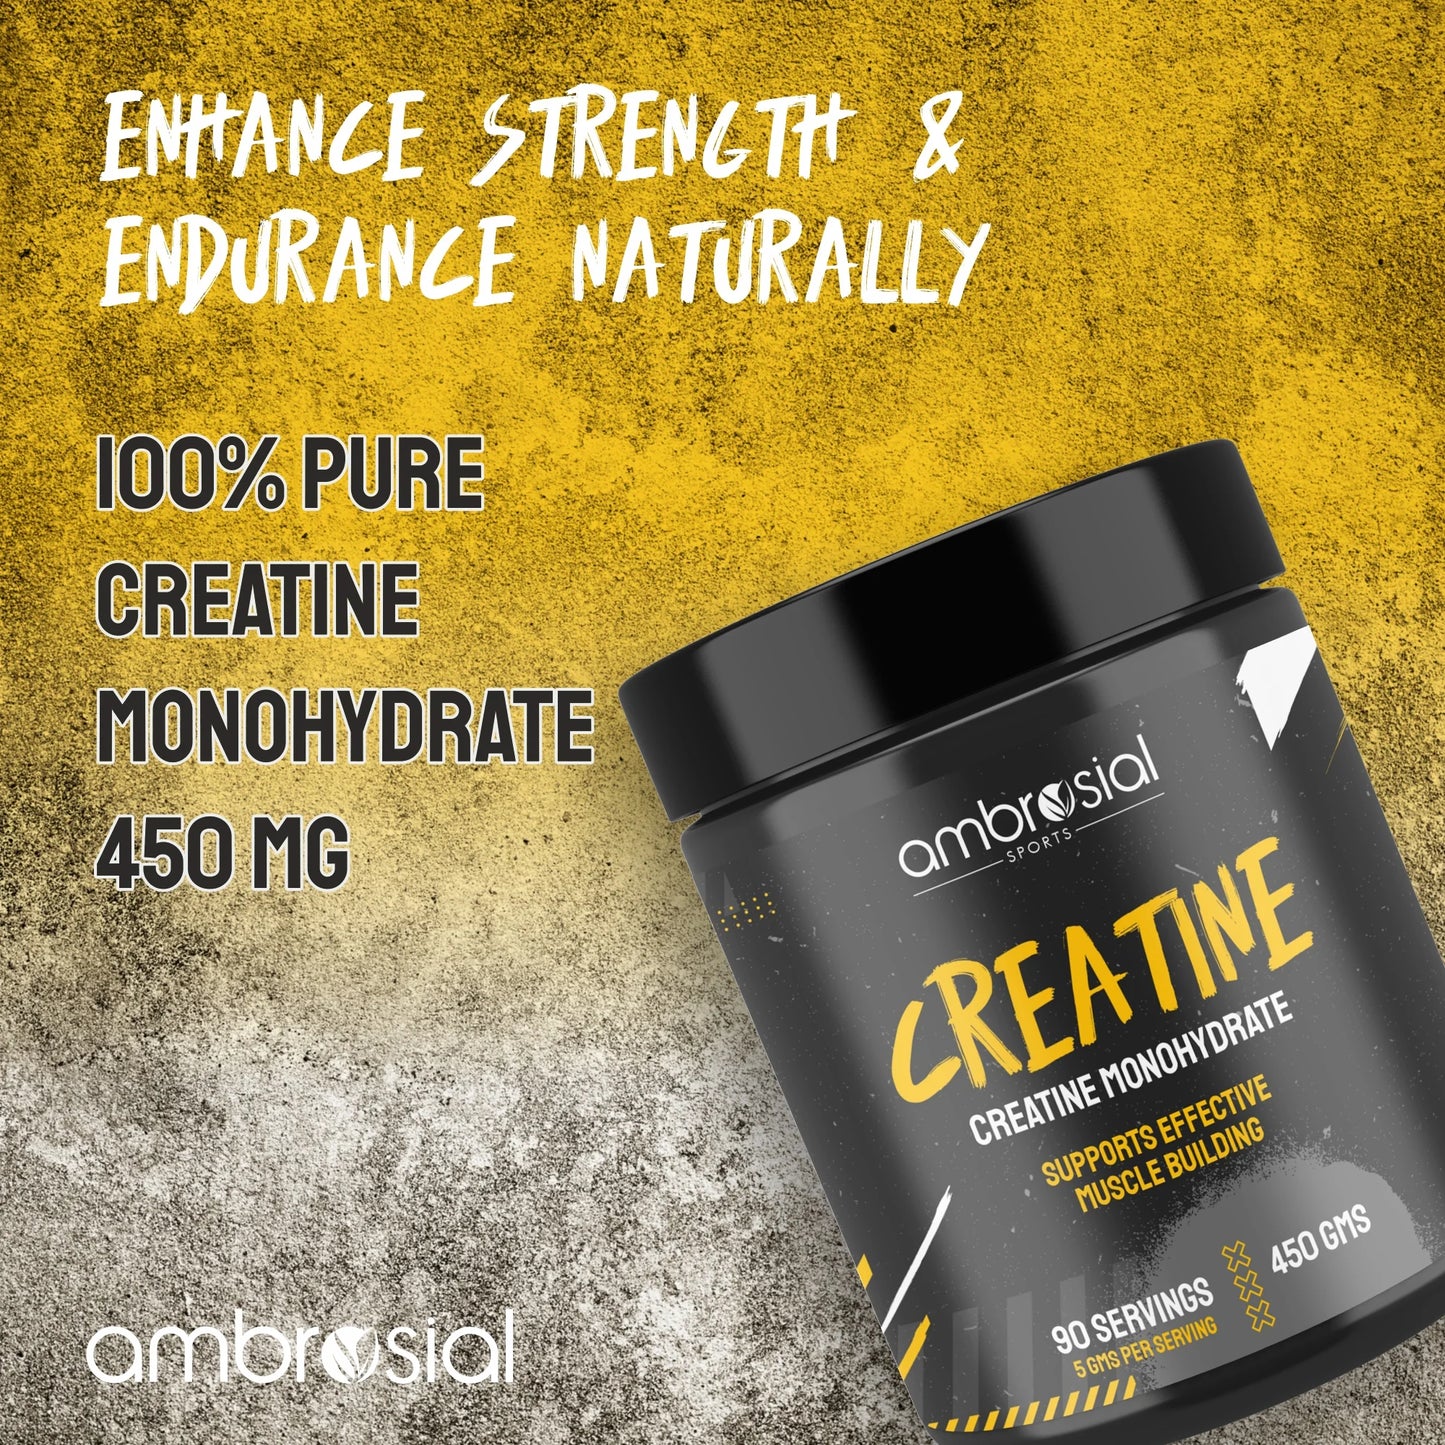 ambrosial Nutri Food Creatine Muscle Building 450MG